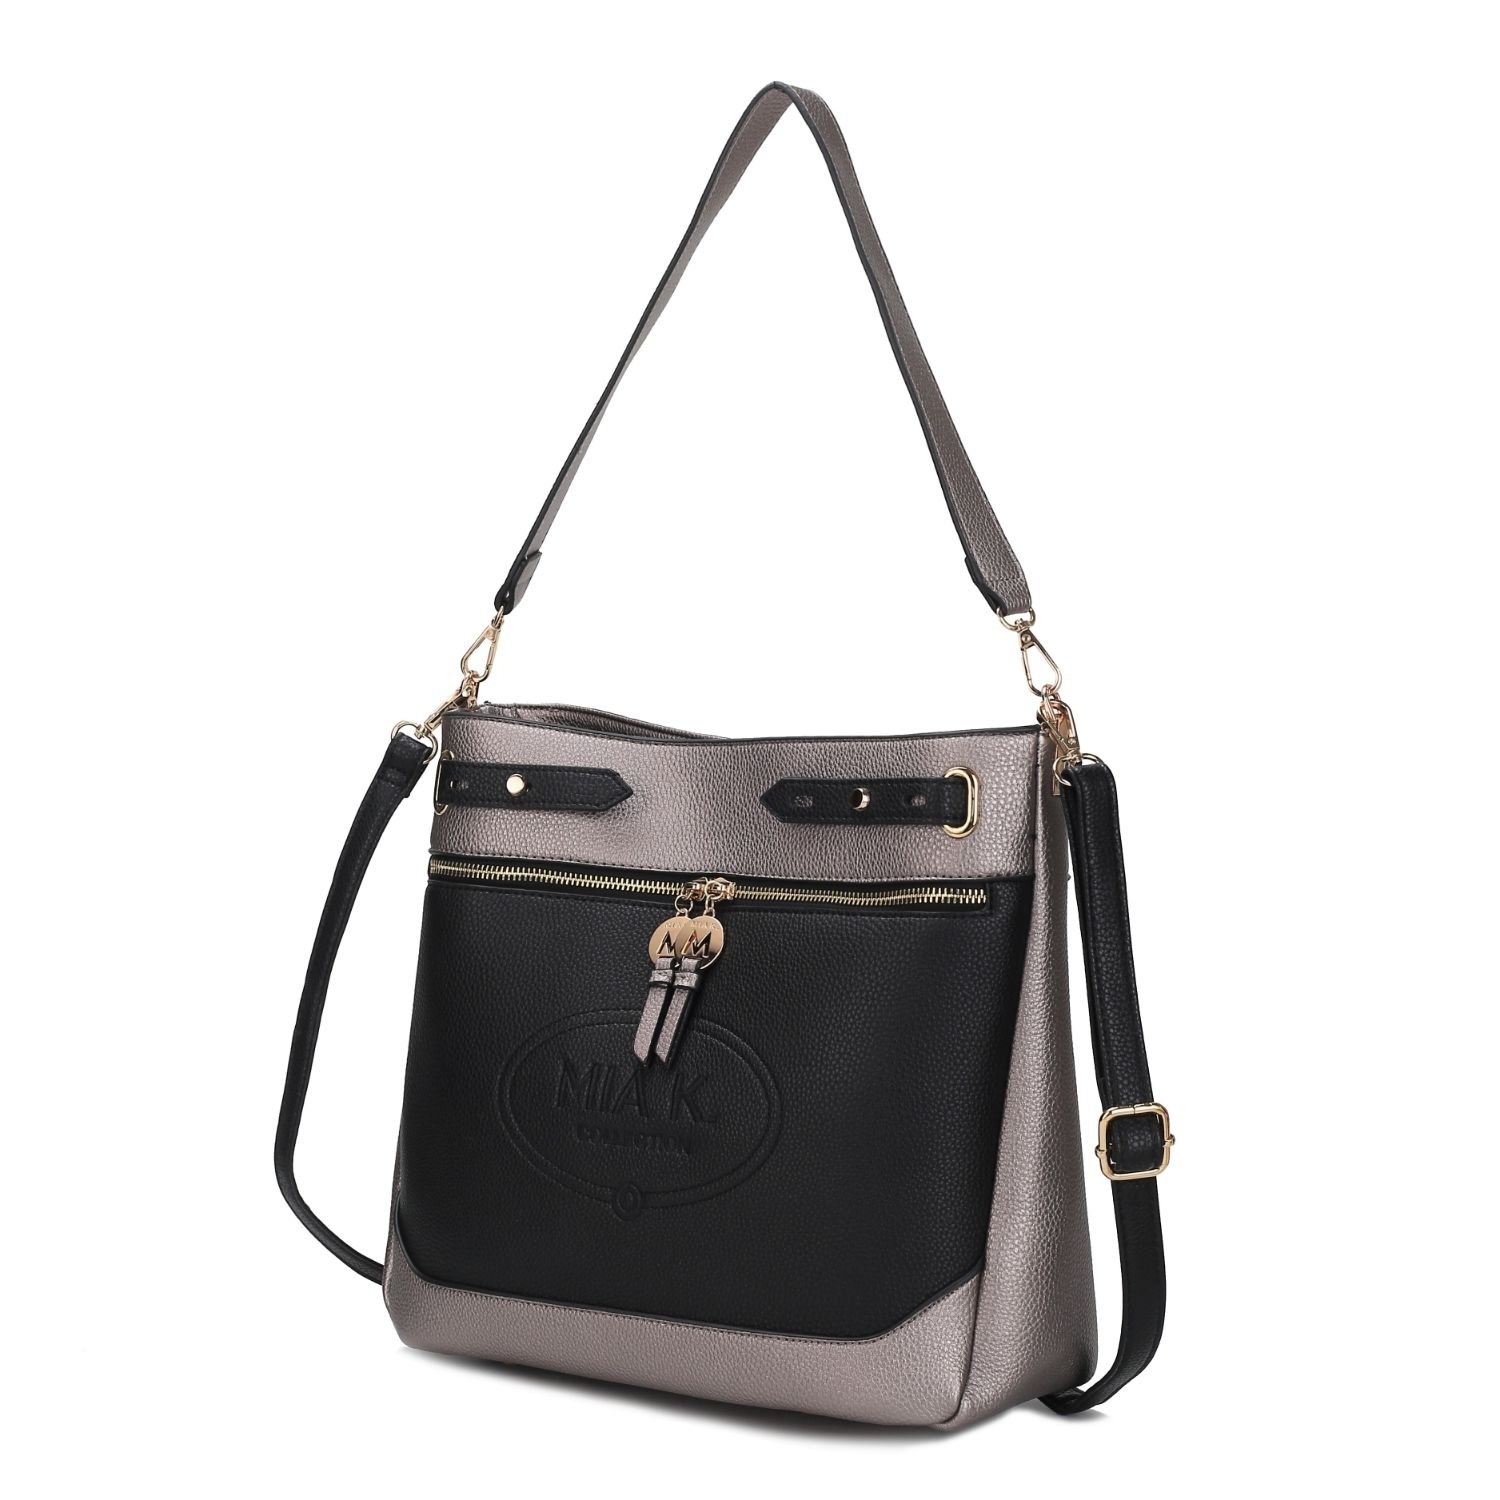 MKF Collection Evie Two-tone Vegan Leather Women's Shoulder Bag By Mia K. - Pewter-black